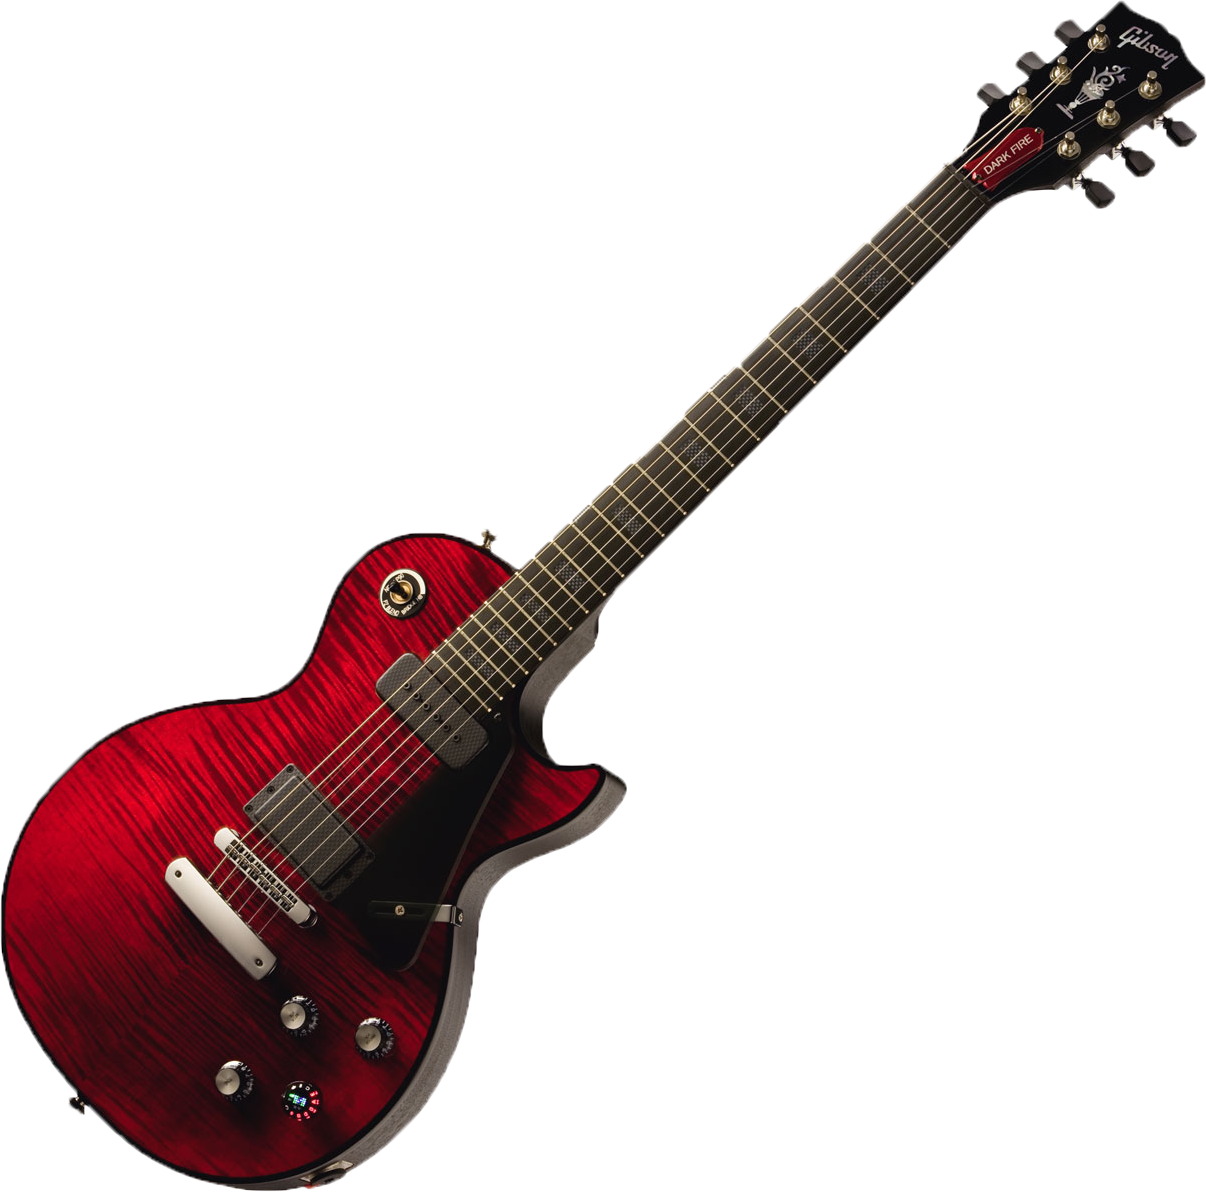 Red Guitar Png - Guitar, Transparent background PNG HD thumbnail